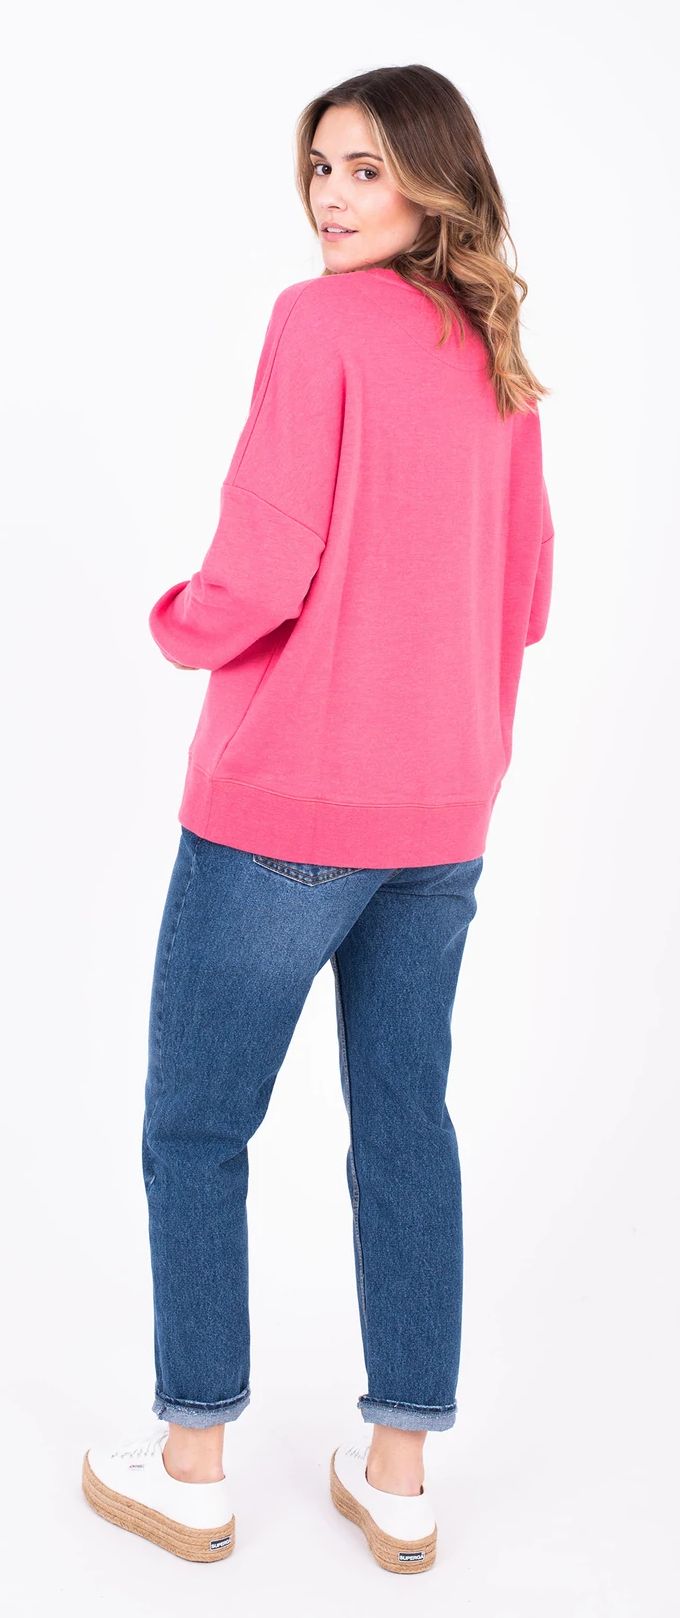 Brakeburn women's sweater in bright pink with Apres Surf print on the front and a plain back.